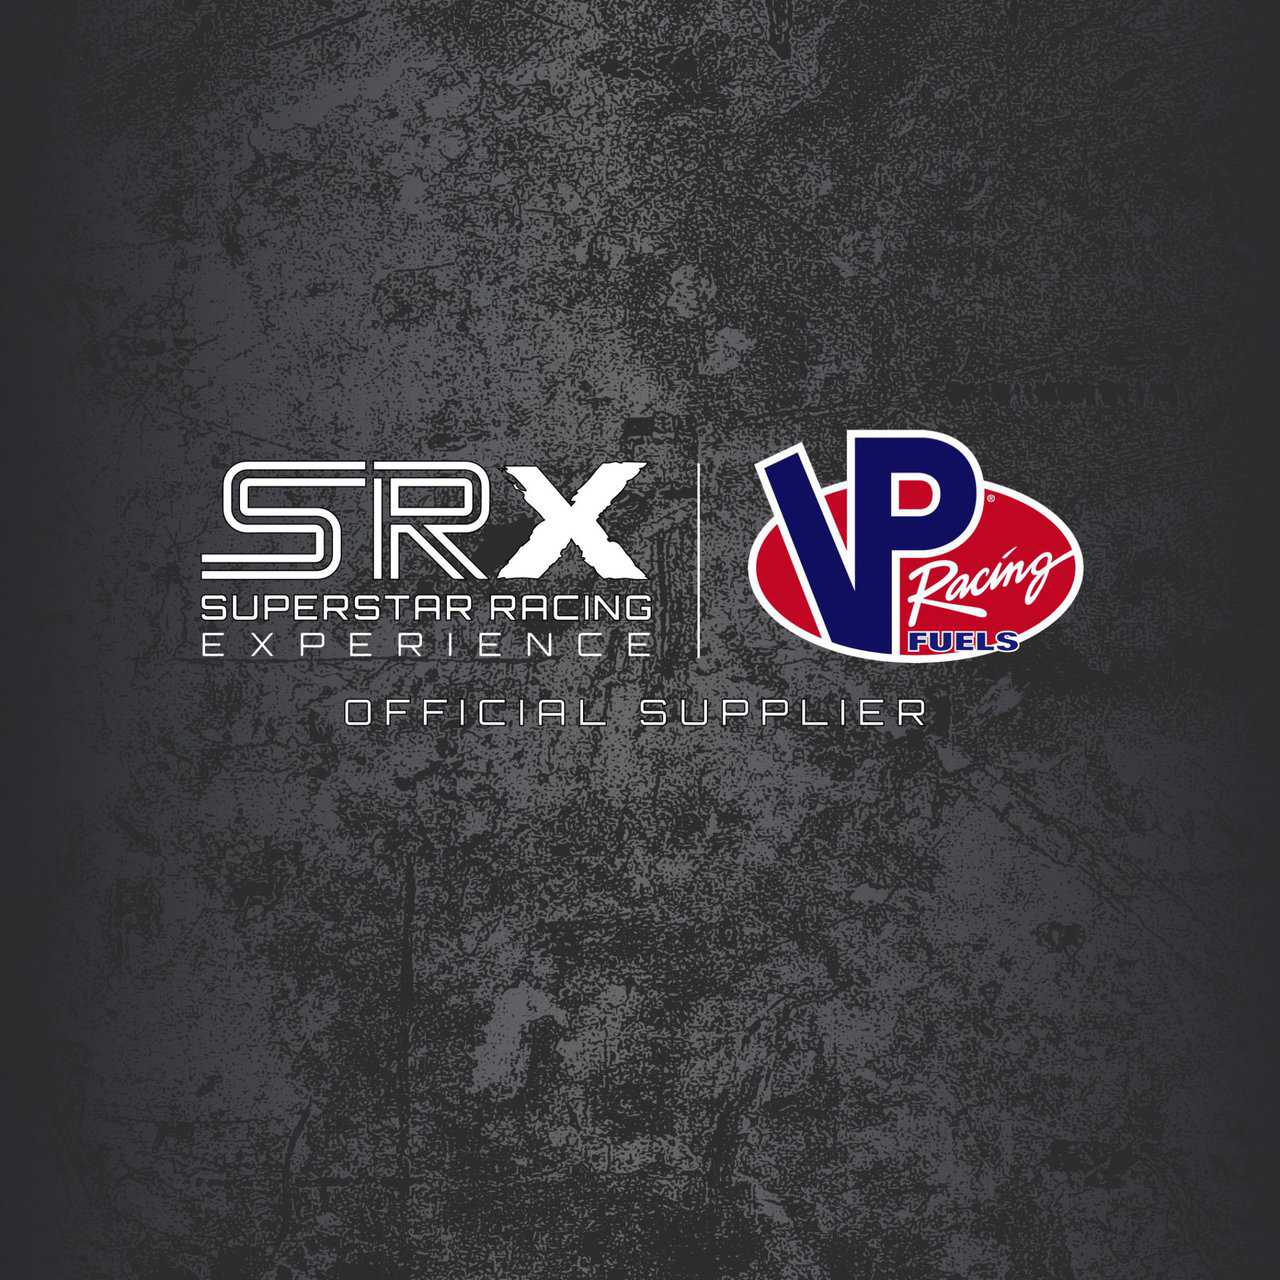 VP Racing Fuels Named an Official Supplier of Superstar Racing Experience